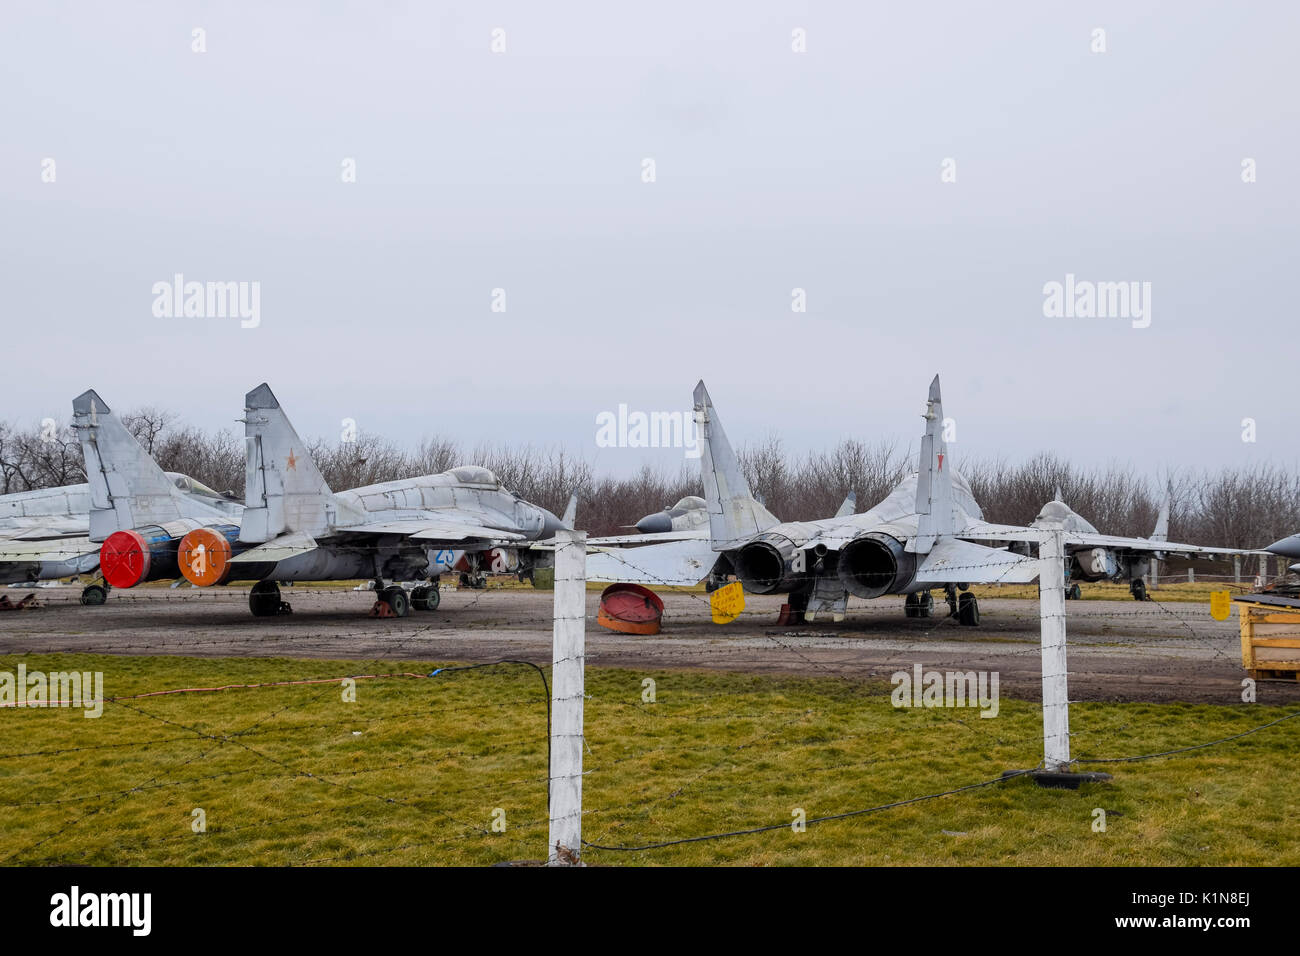 Krasnodar, Russia - February 23, 2017: Military aircraft fighters at the airport. Old decommissioned aircraft. Krasnodar airfield Stock Photo